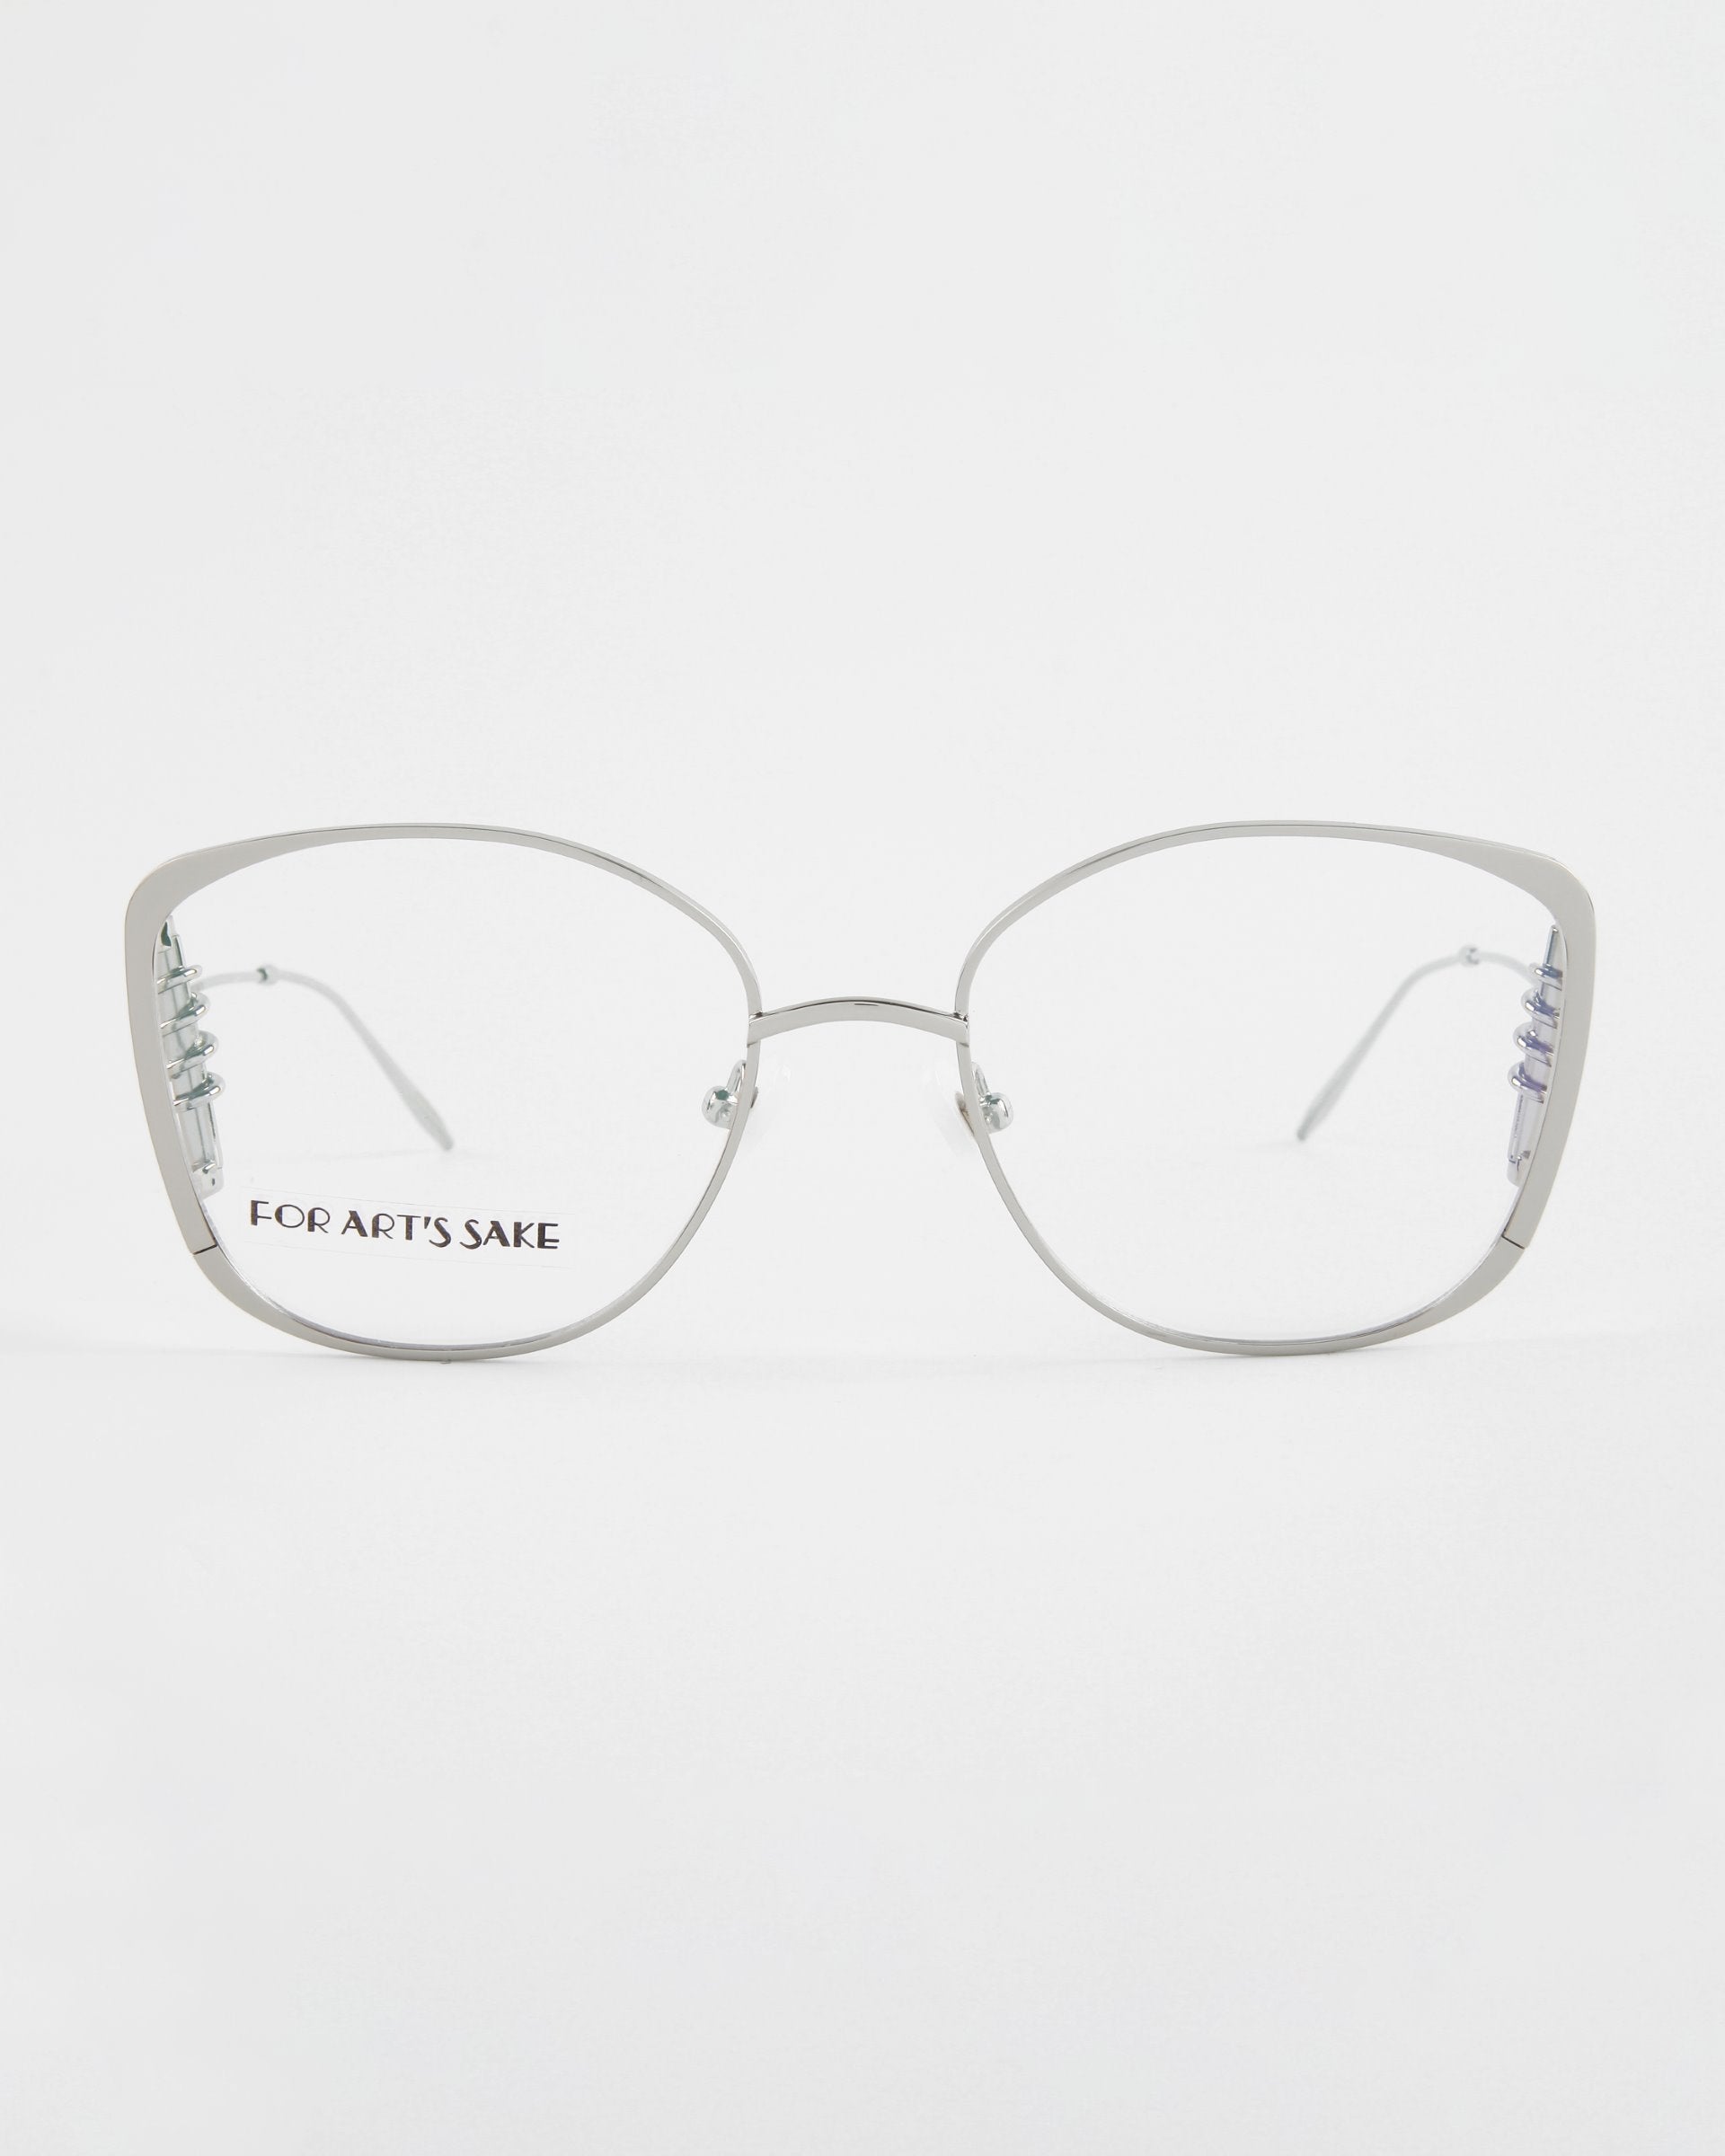 Front view of a pair of eyeglasses with silver metal frames and clear lenses featuring an 18-karat gold plating. The brand name "For Art's Sake®" is visible on the left lens. The design is minimalist with subtle cat-eye corners and a thin bridge. The background is plain white. These are the Jupiter model.